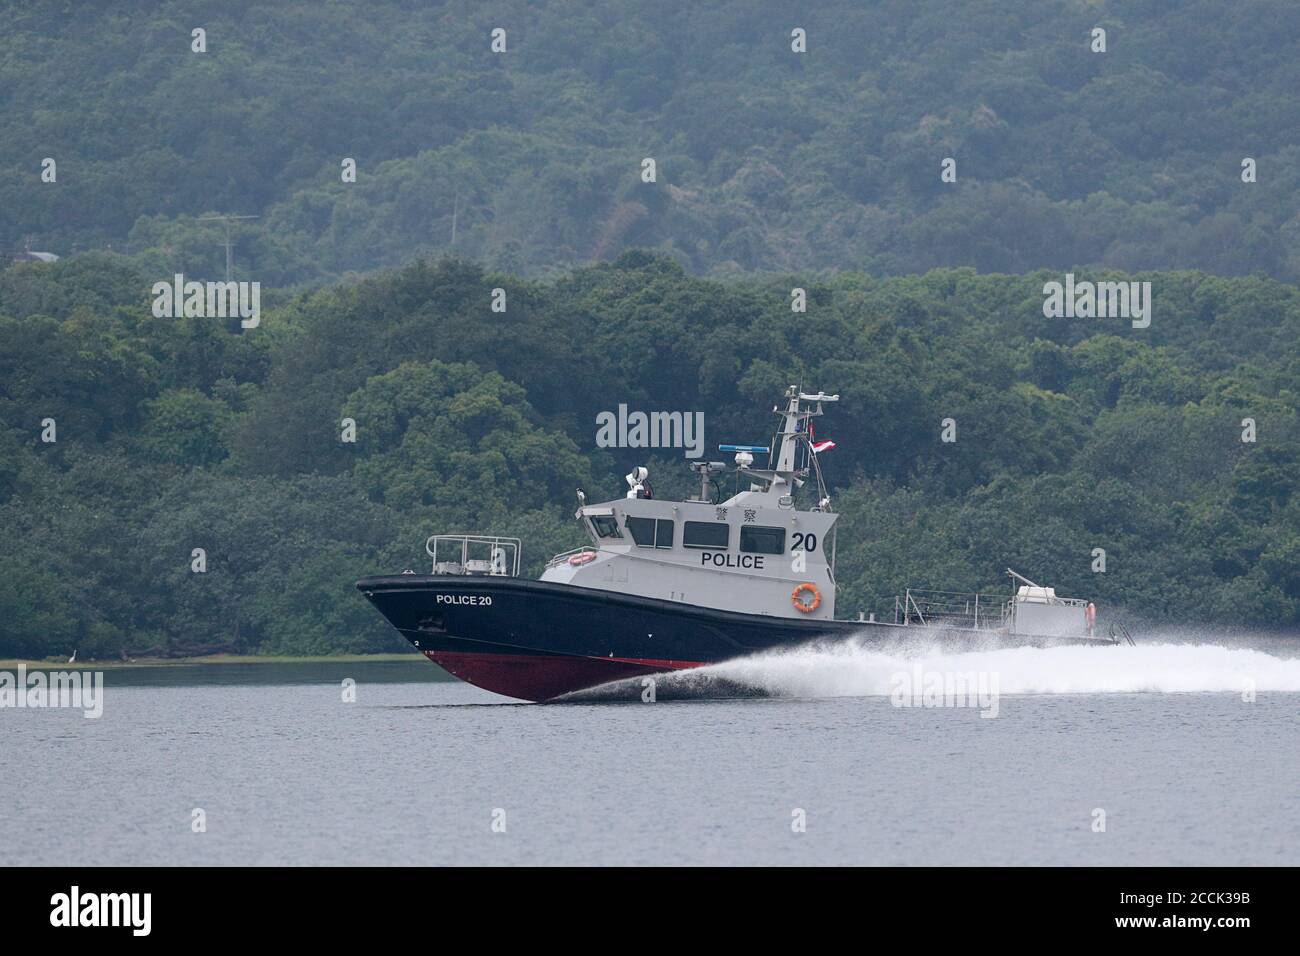 Hong Kong Police Launch 20, at speed, Tolo Harbour, Hong Kong, China 15th August 2018 Stock Photo